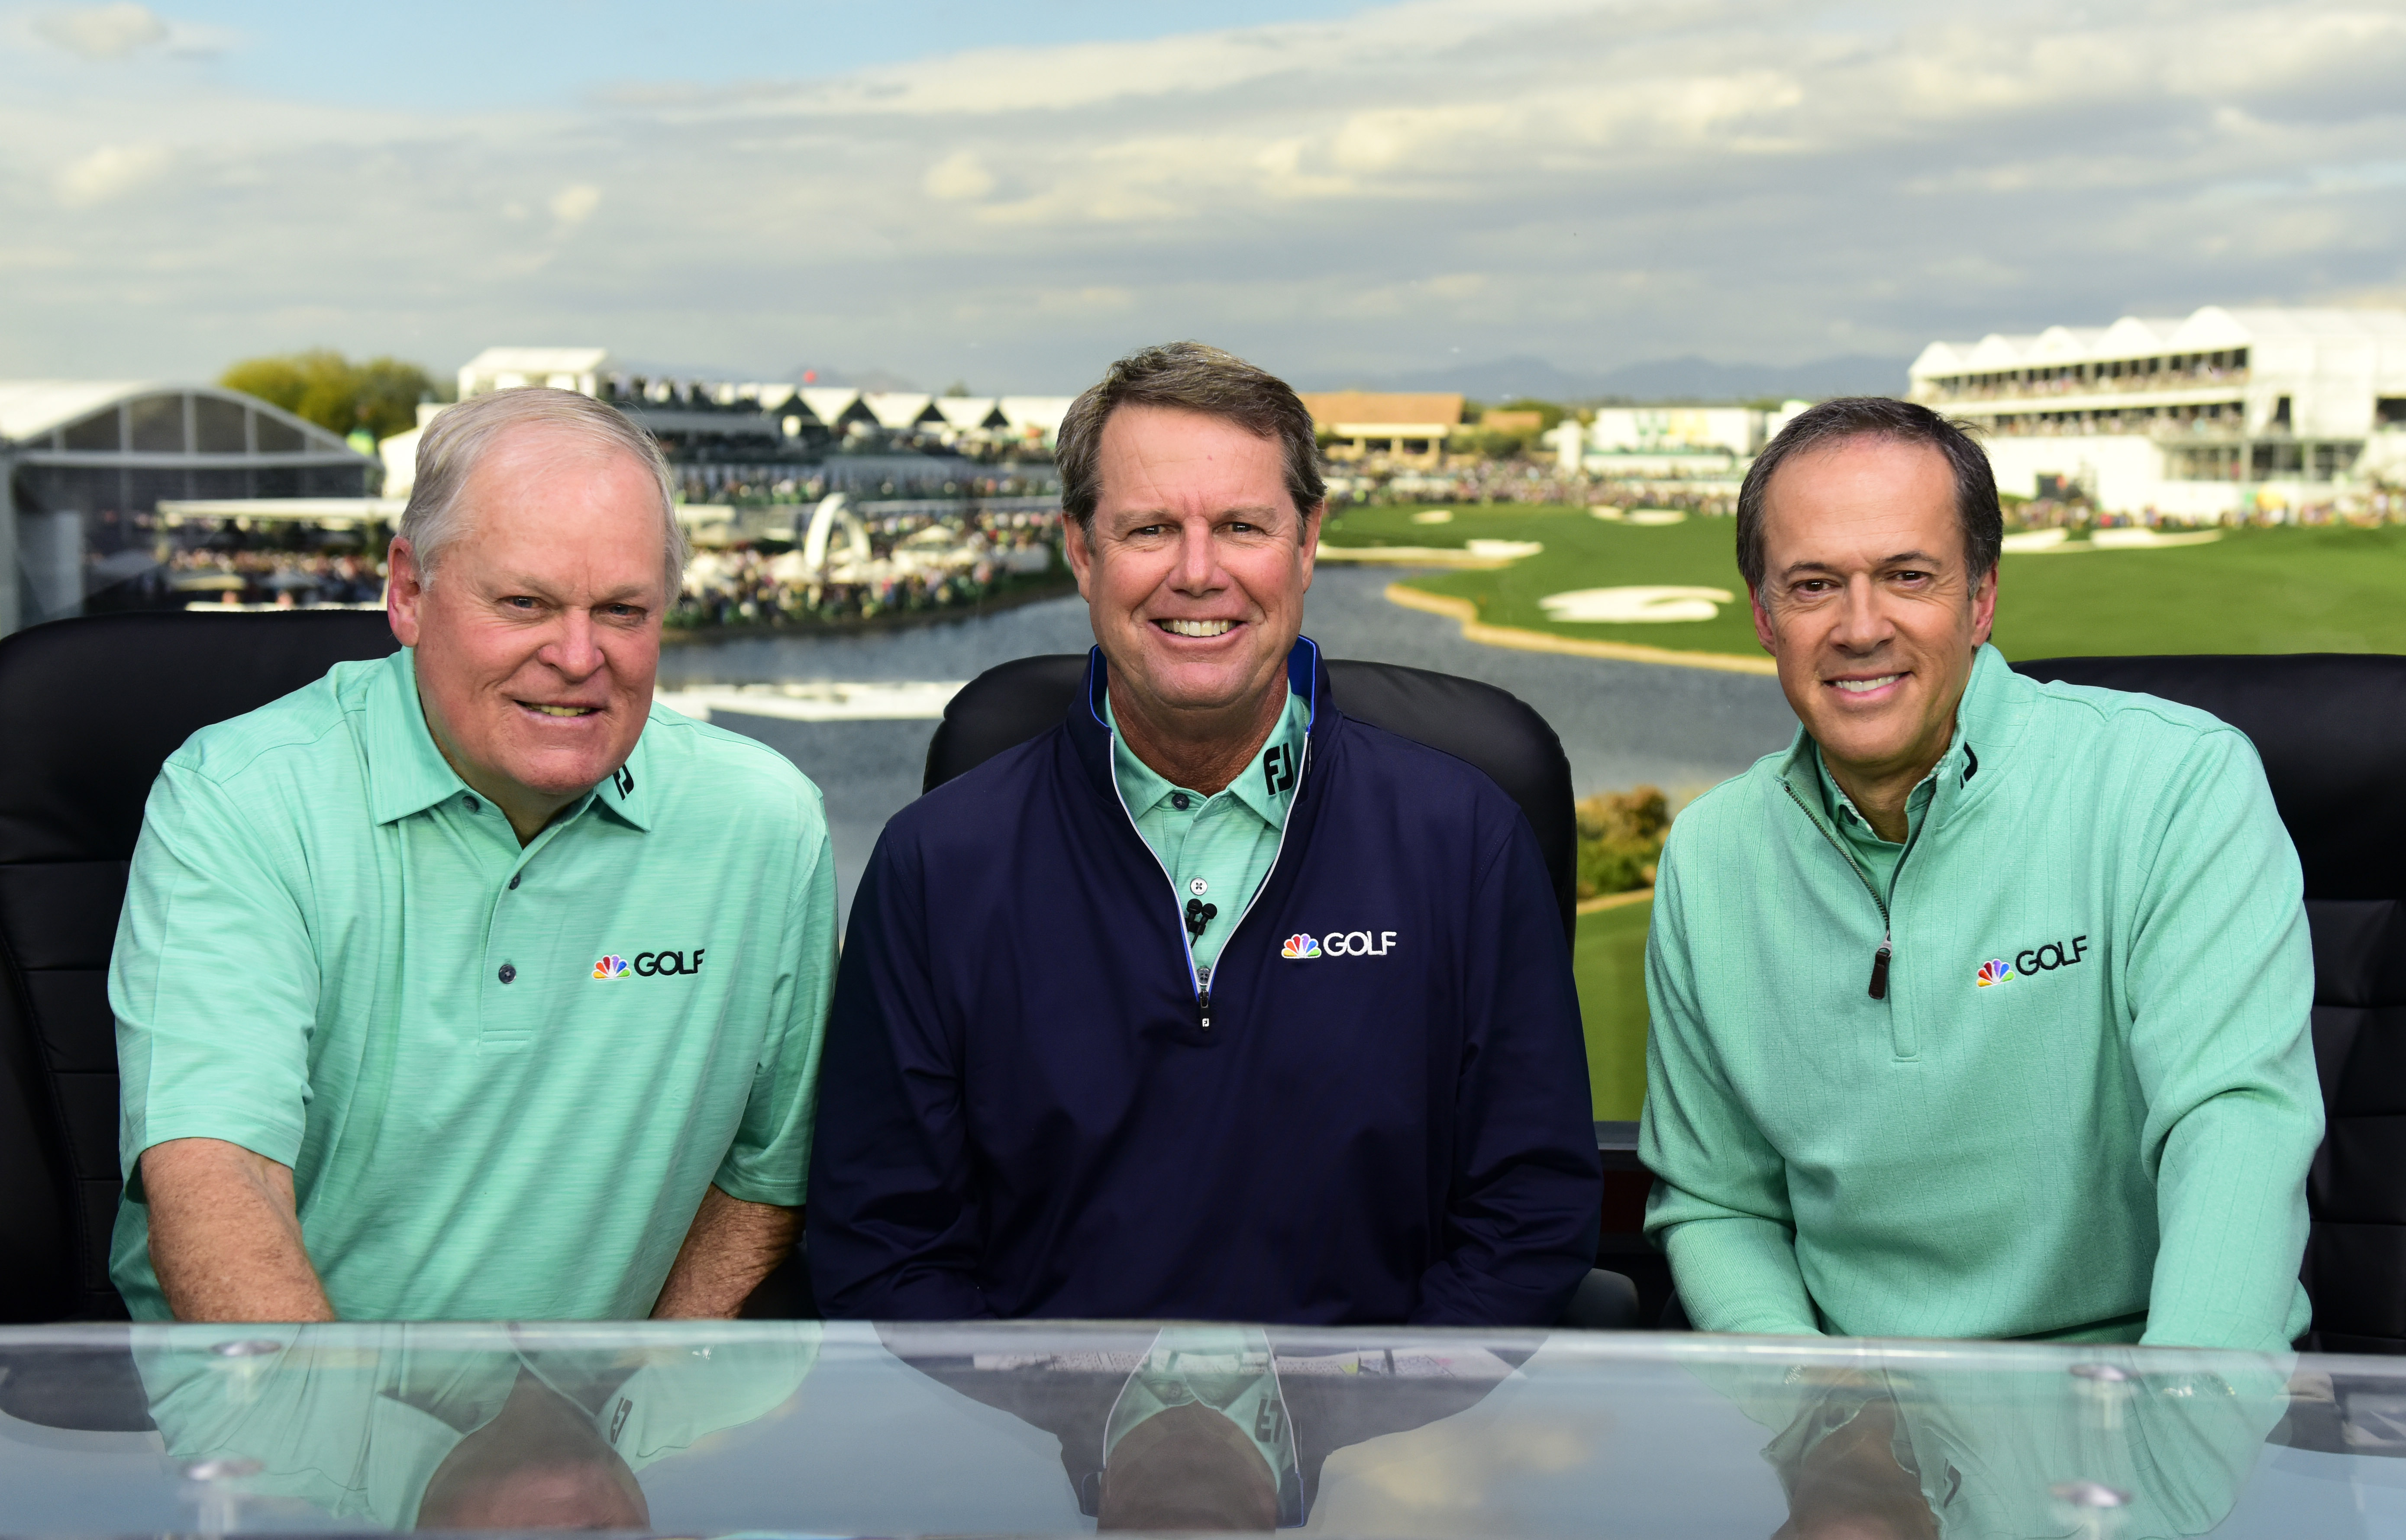 Paul Azinger making official NBC/Golf Channel debut in Mexico this week